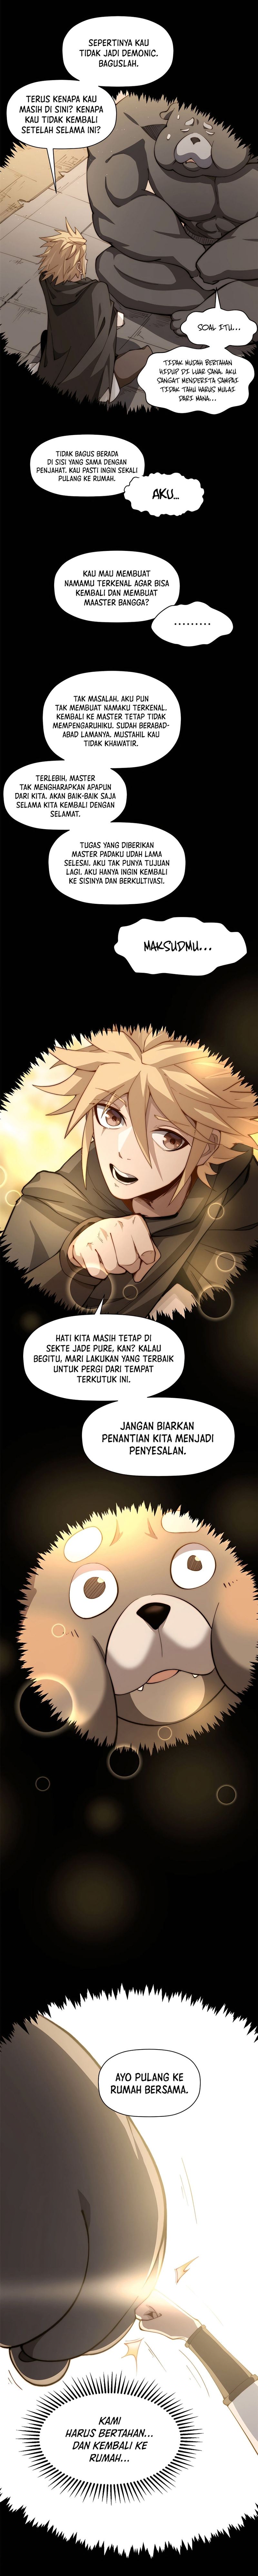 Dilarang COPAS - situs resmi www.mangacanblog.com - Komik top tier providence secretly cultivate for a thousand years 139 - chapter 139 140 Indonesia top tier providence secretly cultivate for a thousand years 139 - chapter 139 Terbaru 7|Baca Manga Komik Indonesia|Mangacan